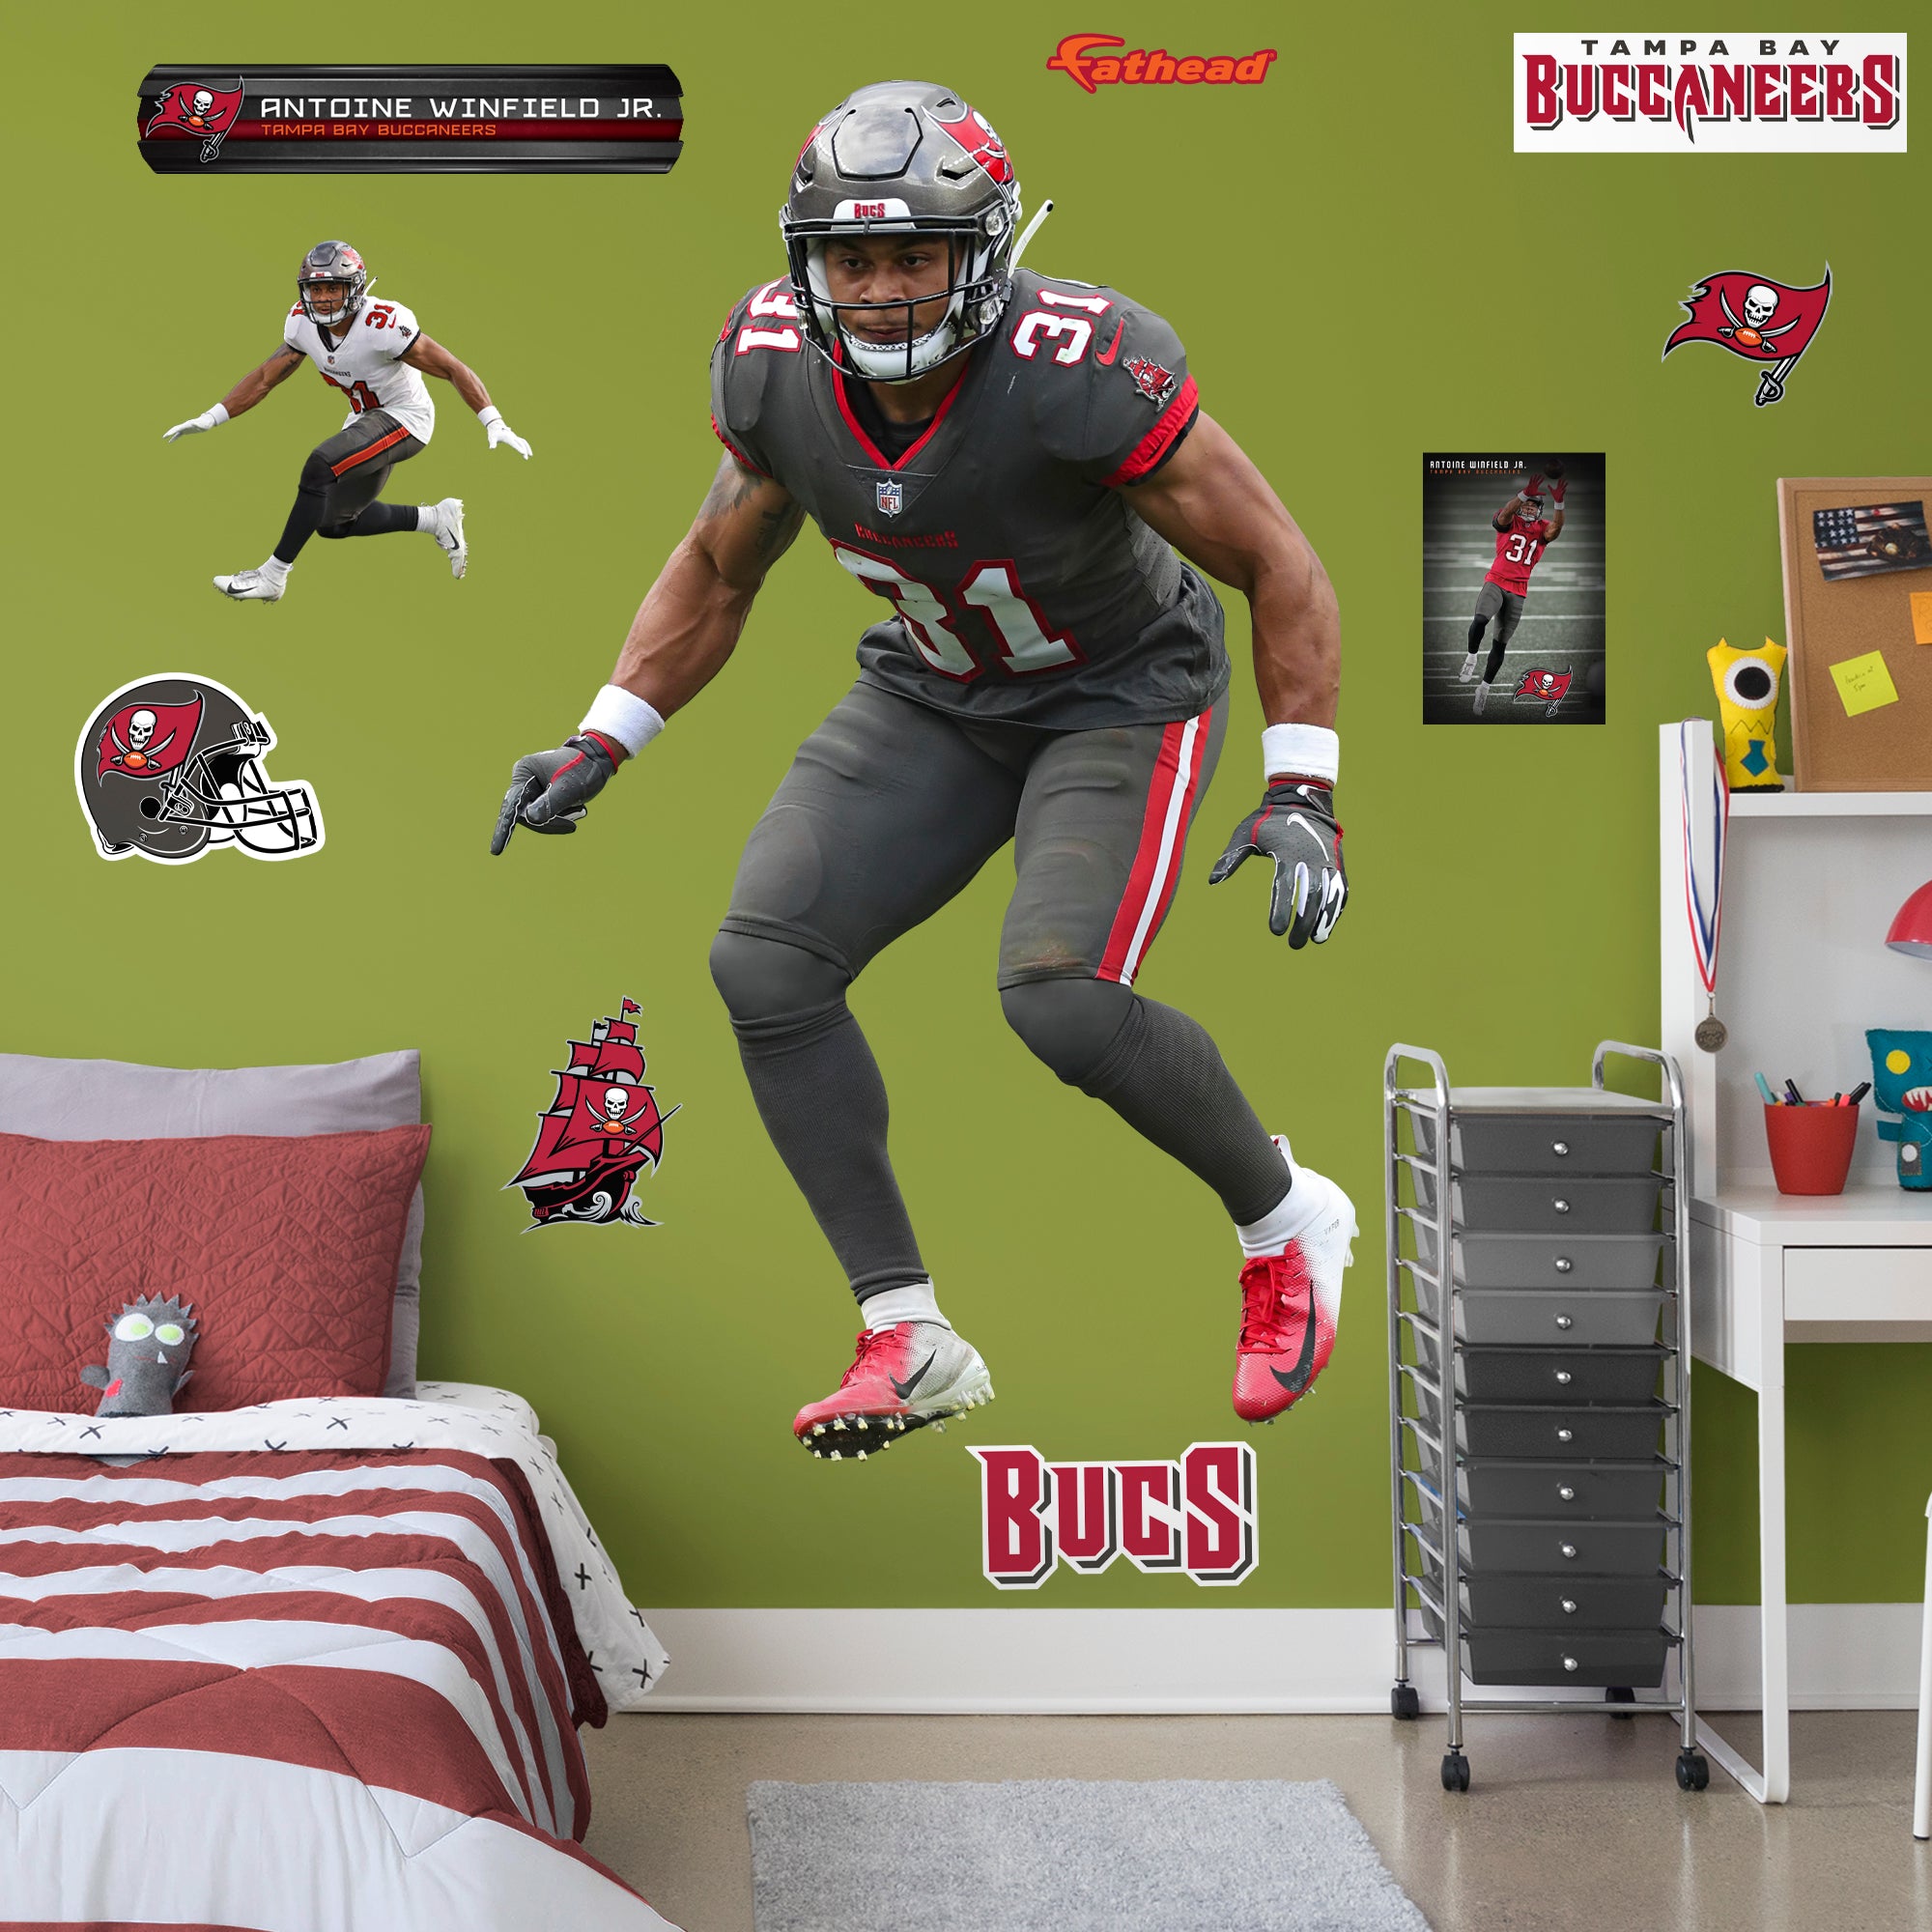 Antoine Winfield Jr. 2020 - Officially Licensed NFL Removable Wall Decal Life-Size Athlete + 9 Decals (49"W x 78"H) by Fathead |